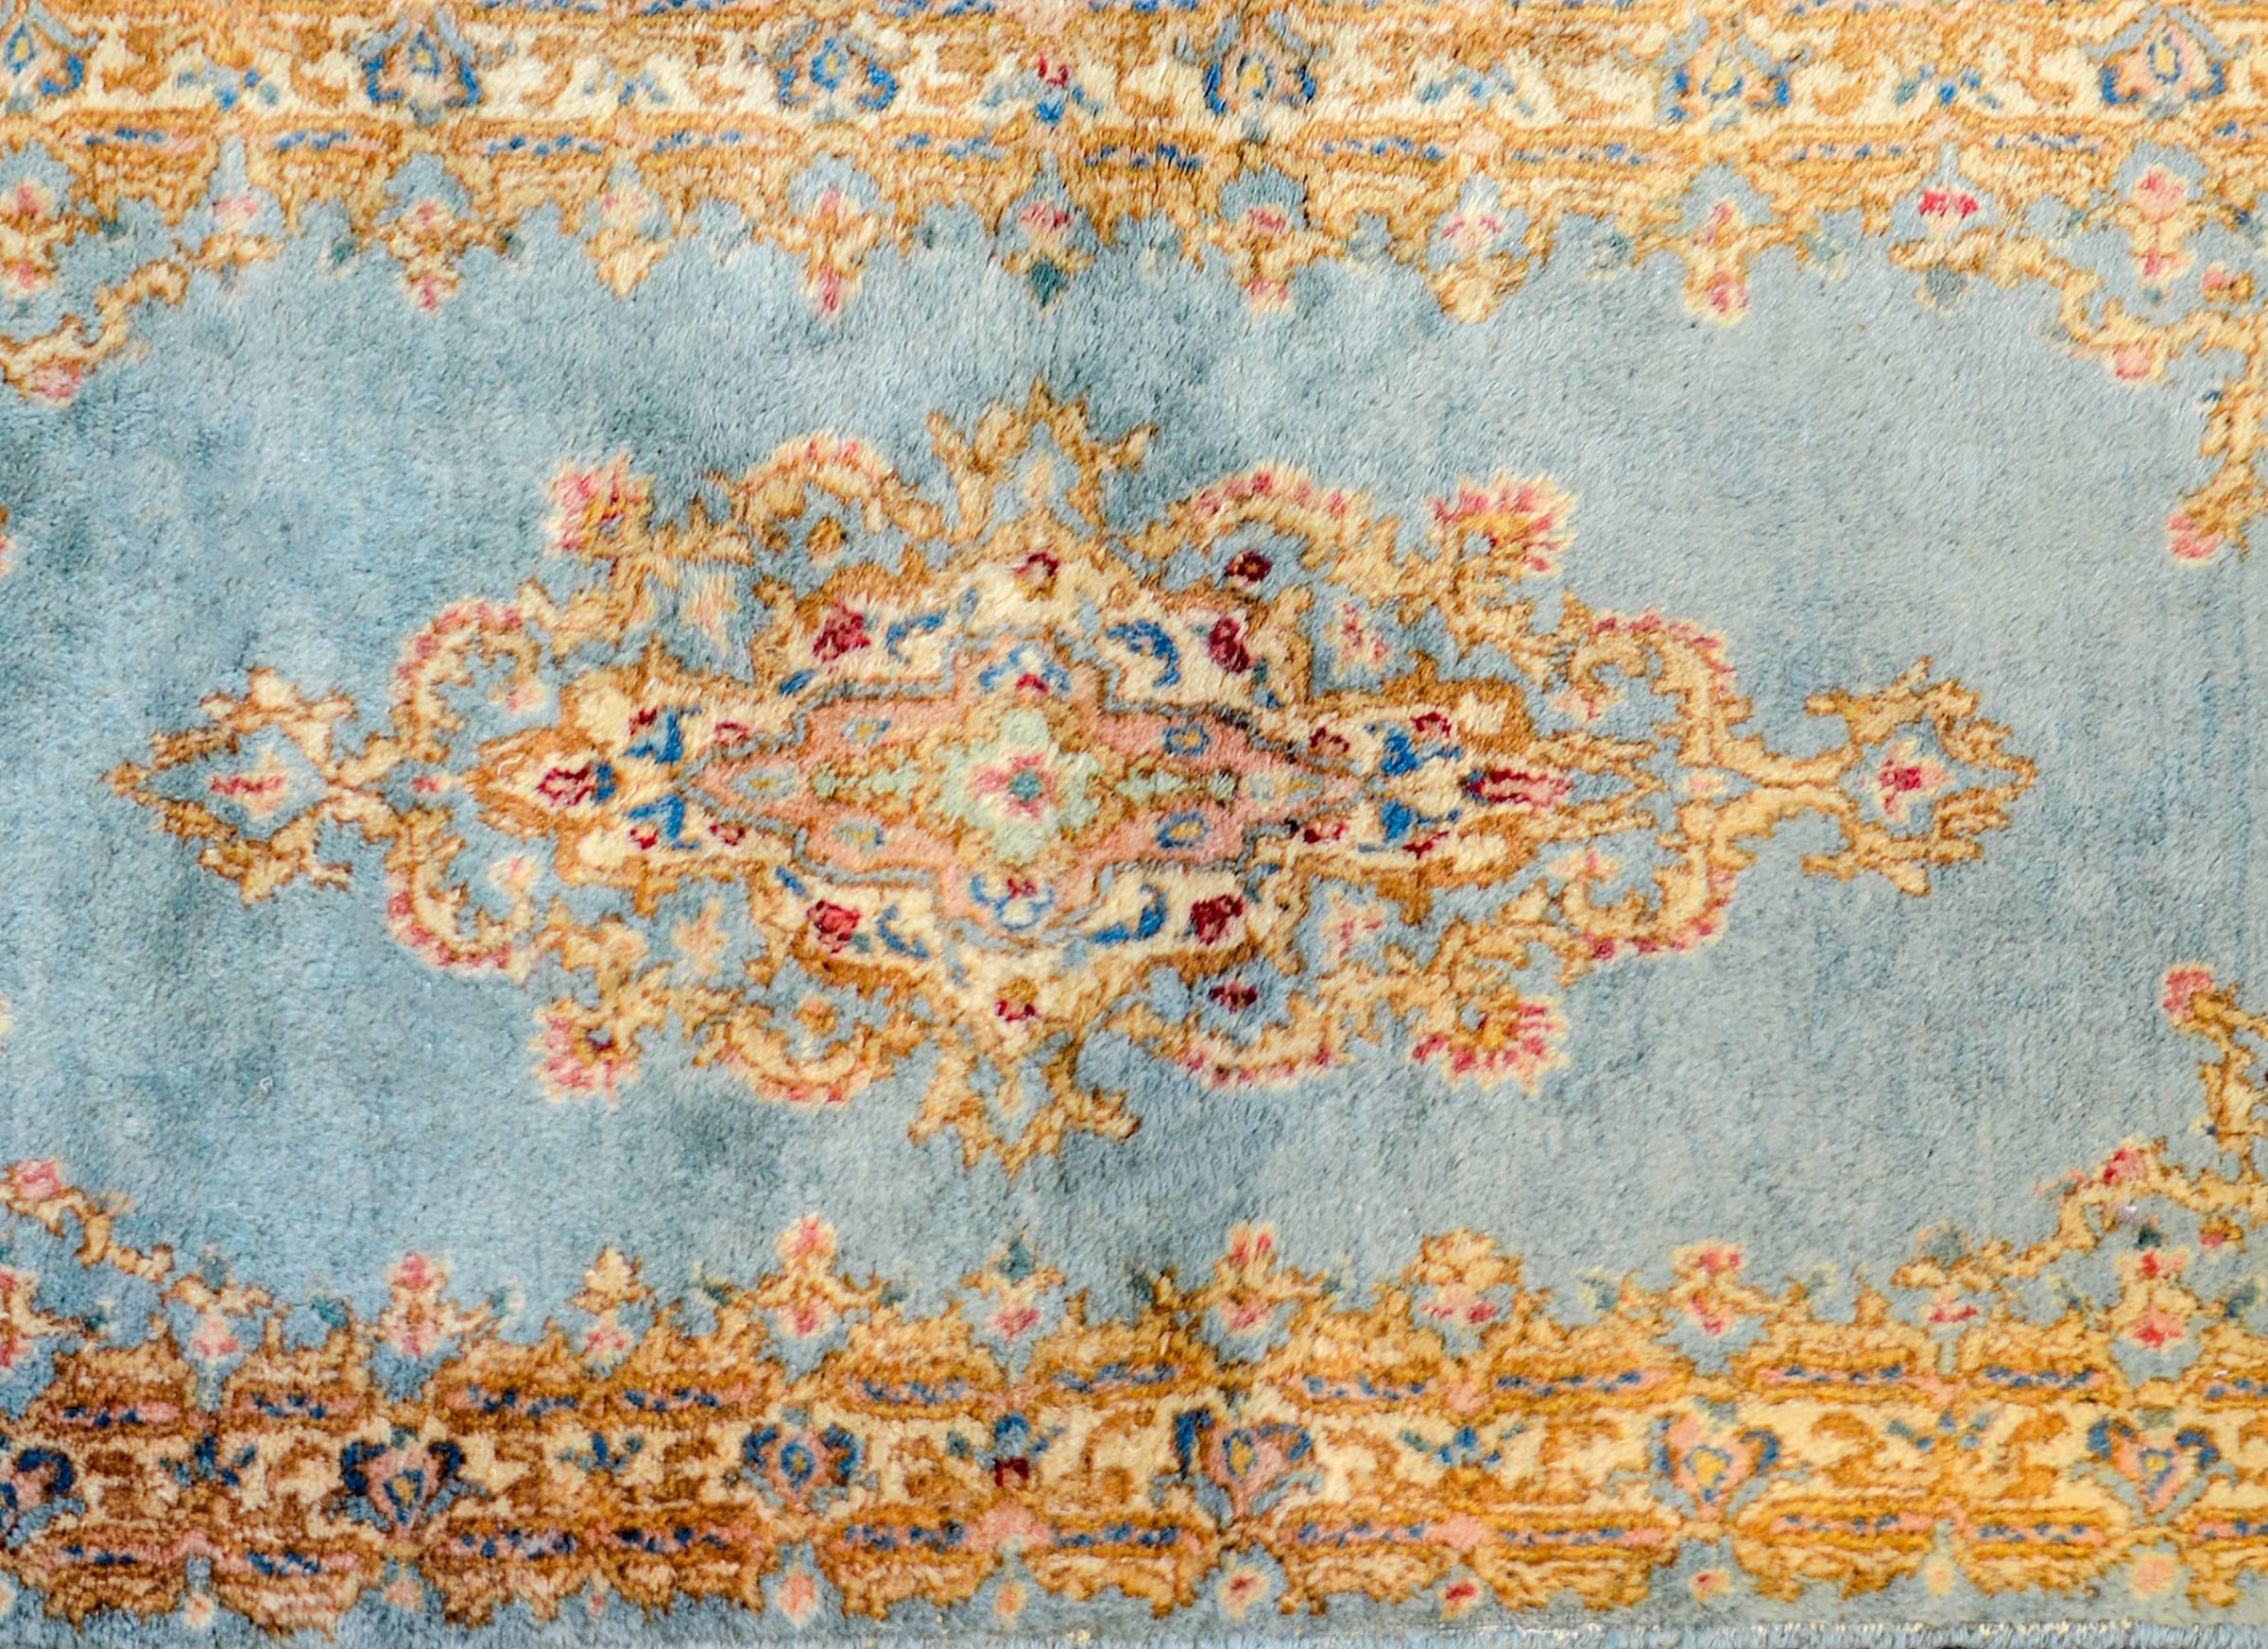 An amazing vintage Persian Kirman rug with woven with an incredible high quality shimmering silky indigo and gold vegetable dyed wool with a large diamond form floral medallion. The border is fantastic with an intensely woven baroque floral border.